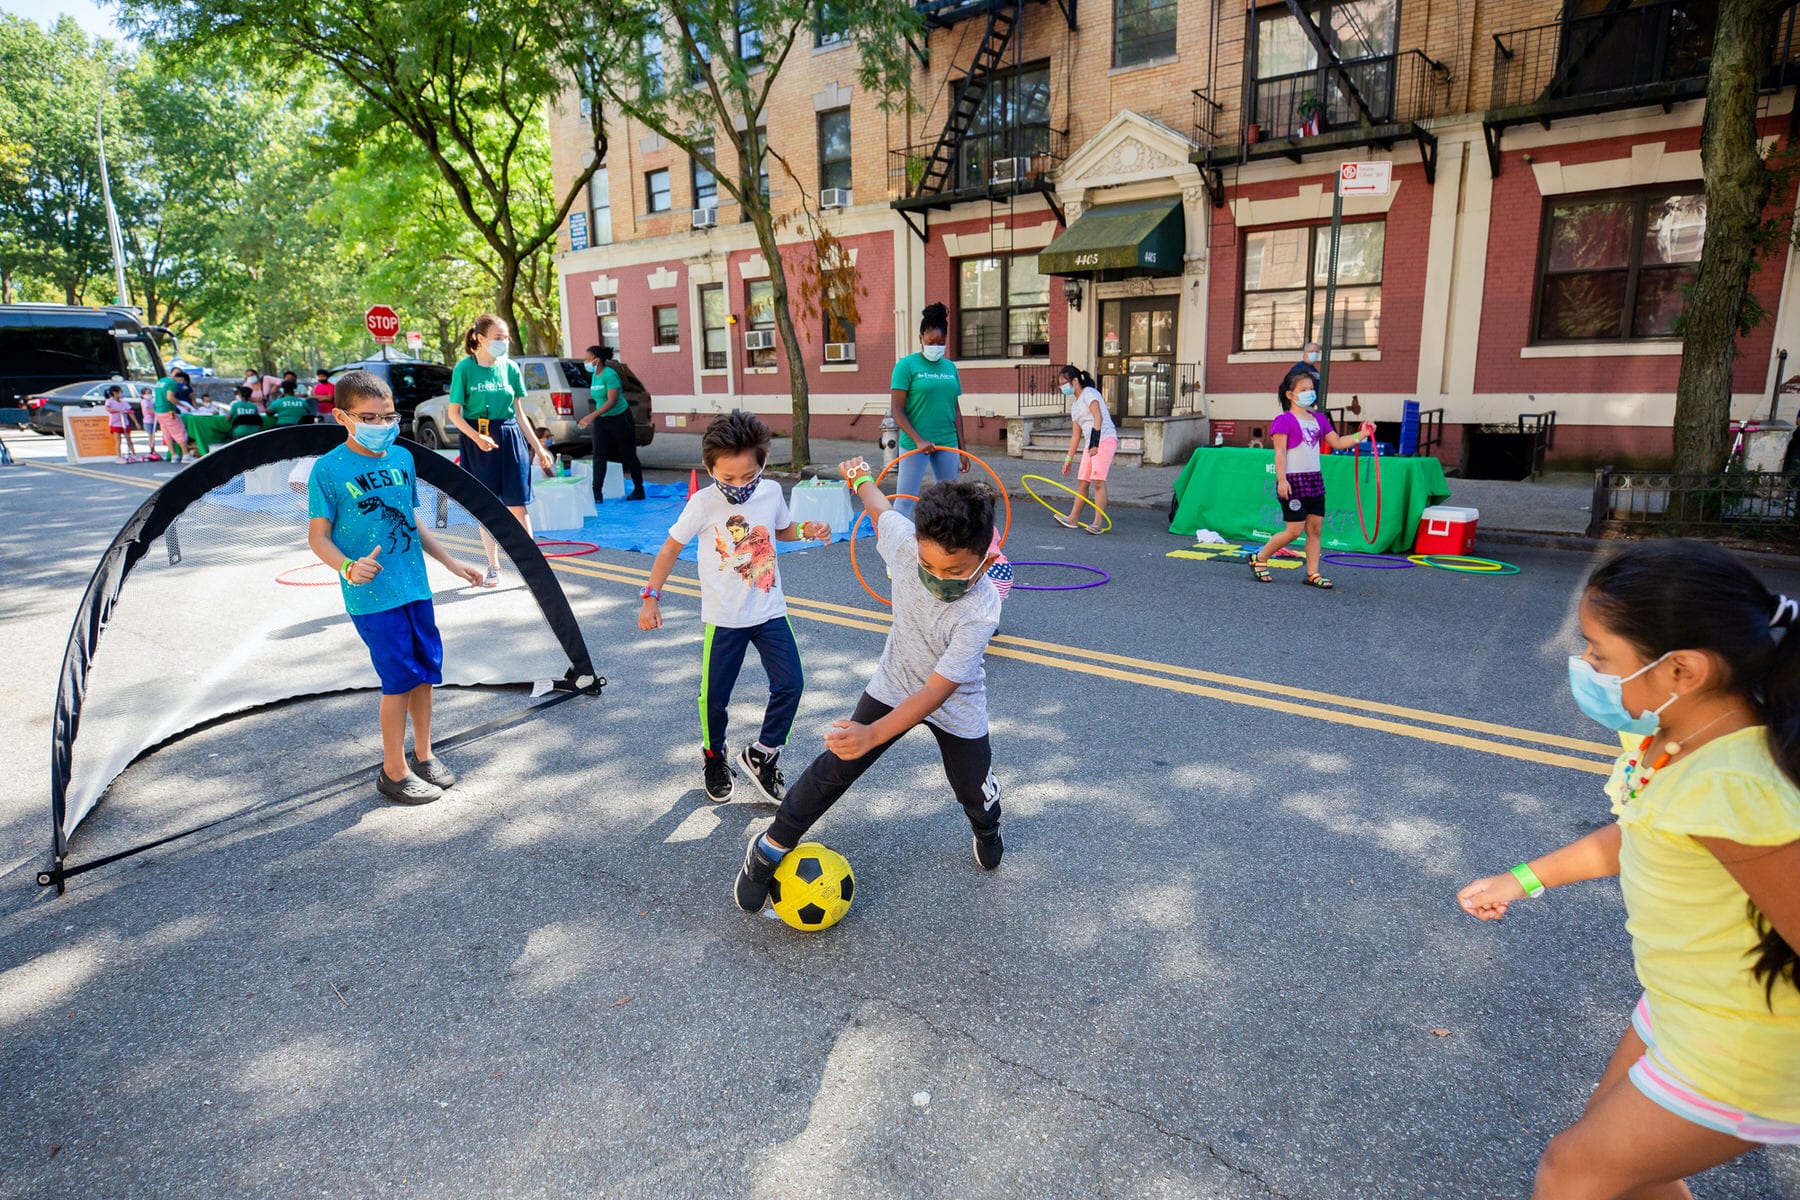 Kids playing soccer on a city street.